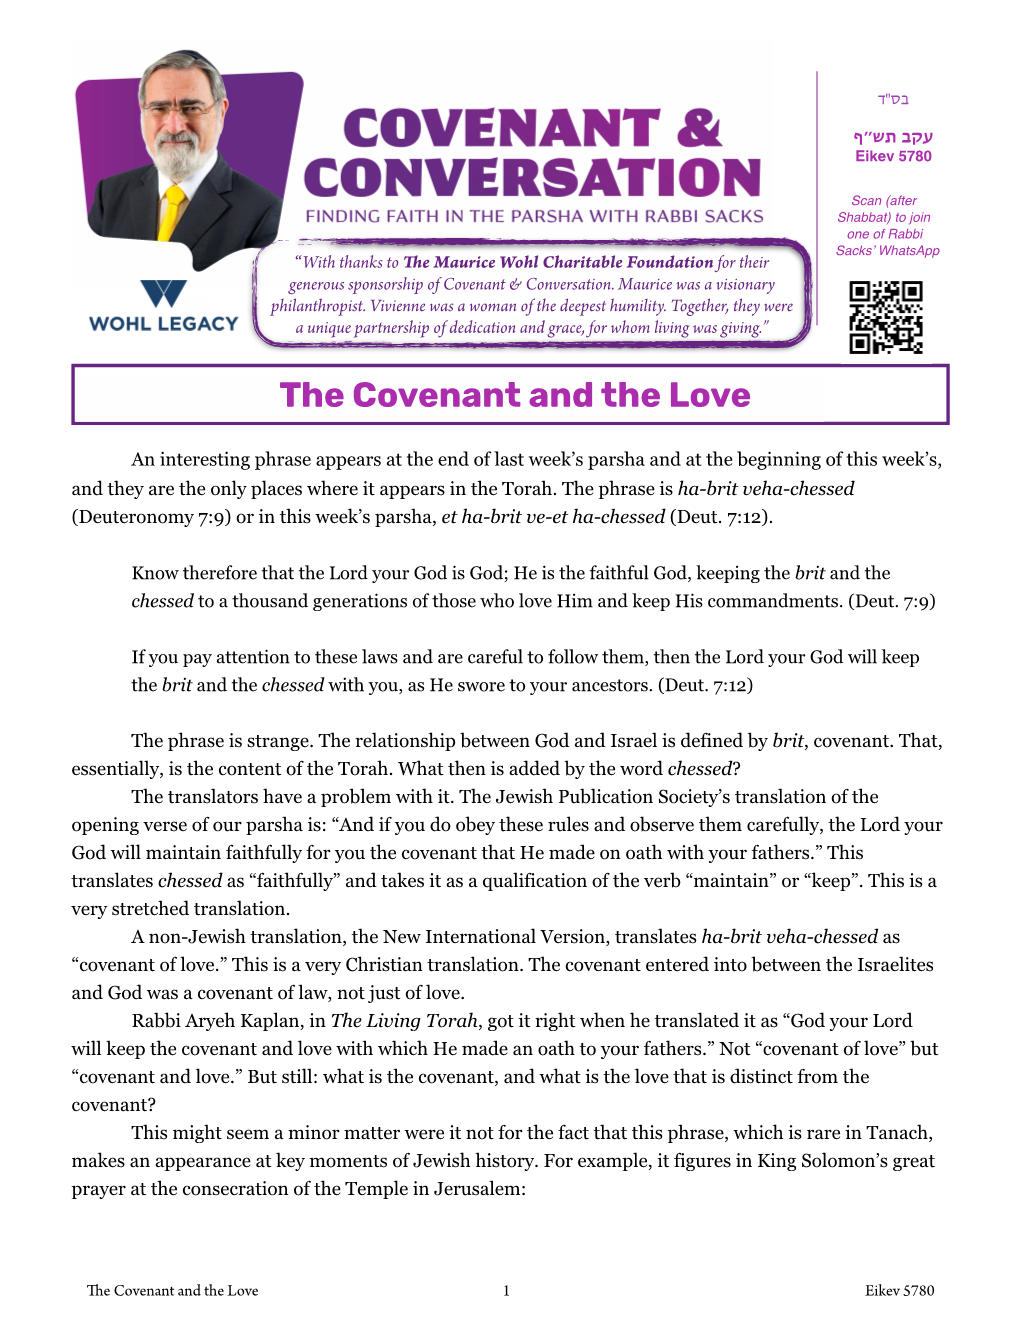 The Covenant and the Love (Eikev 5780)